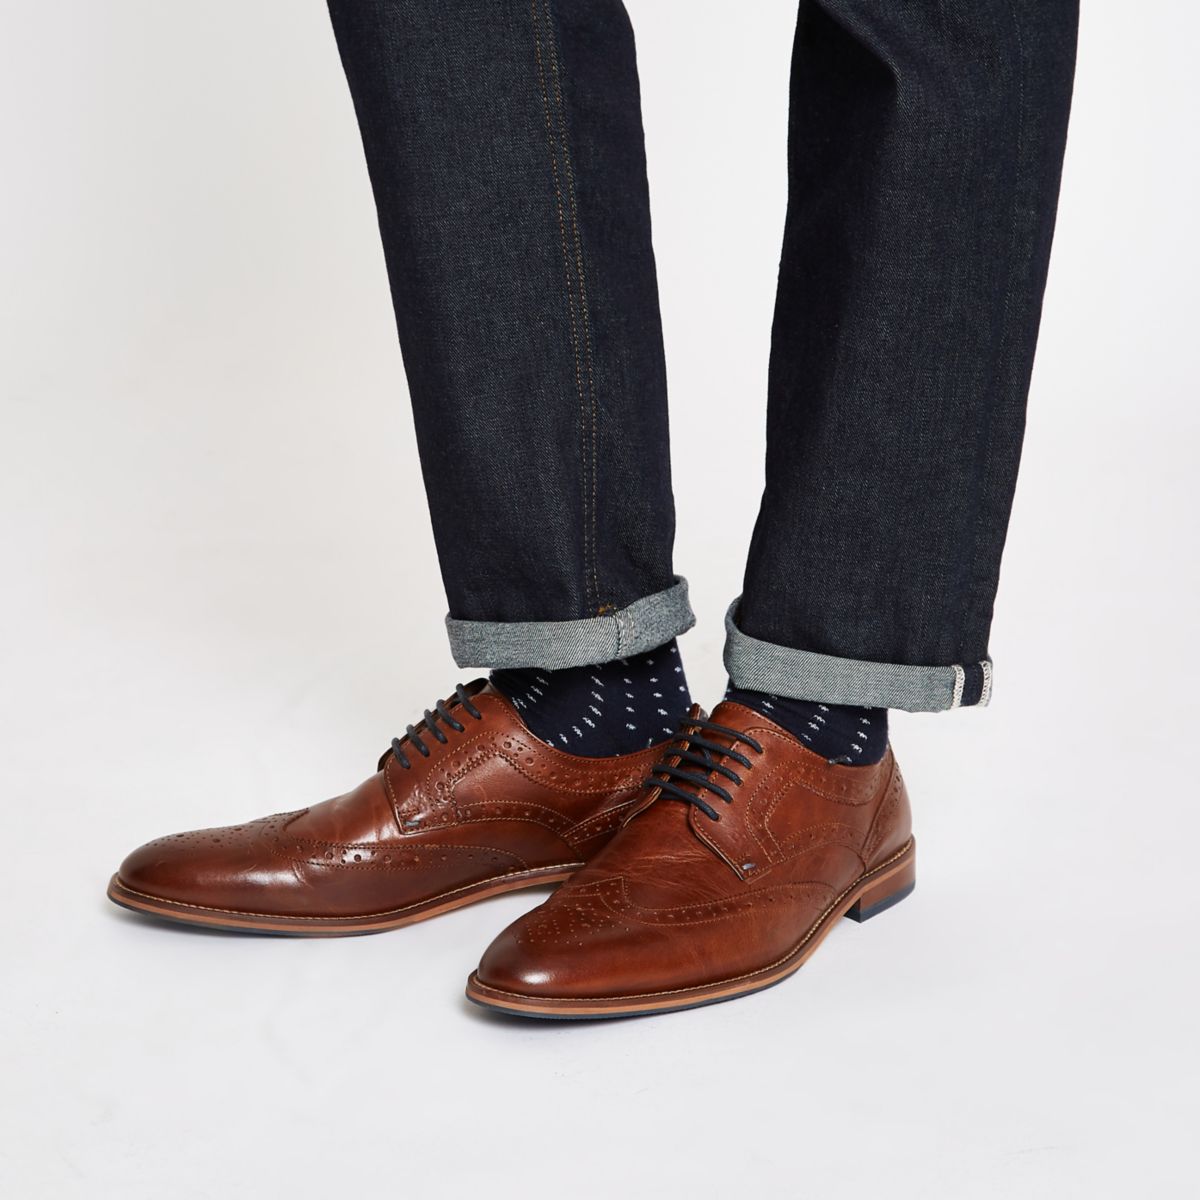 Dark brown leather brogues - Shoes - Shoes & Boots - men